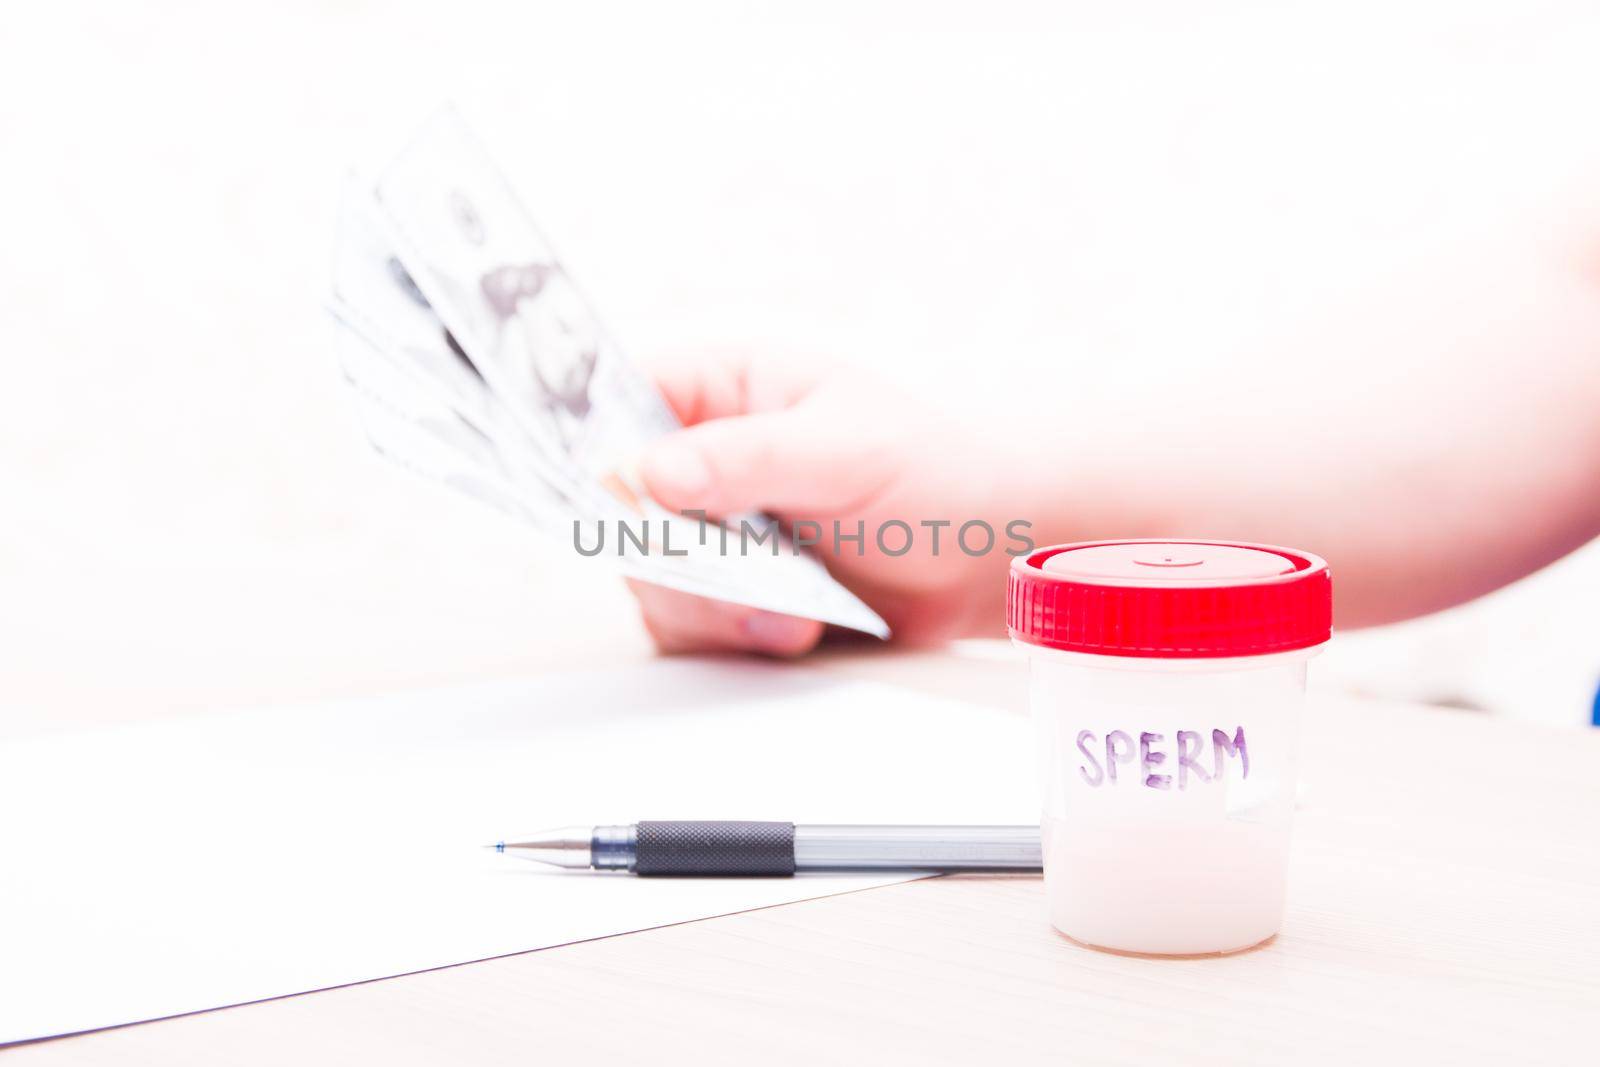 test jar with a red lid and the inscription sperm, against the background a man holds several notes of 100 dallors, a copy space, sperm in a jar, a sperm donor concept, sell sperm, a pen and paper on the table